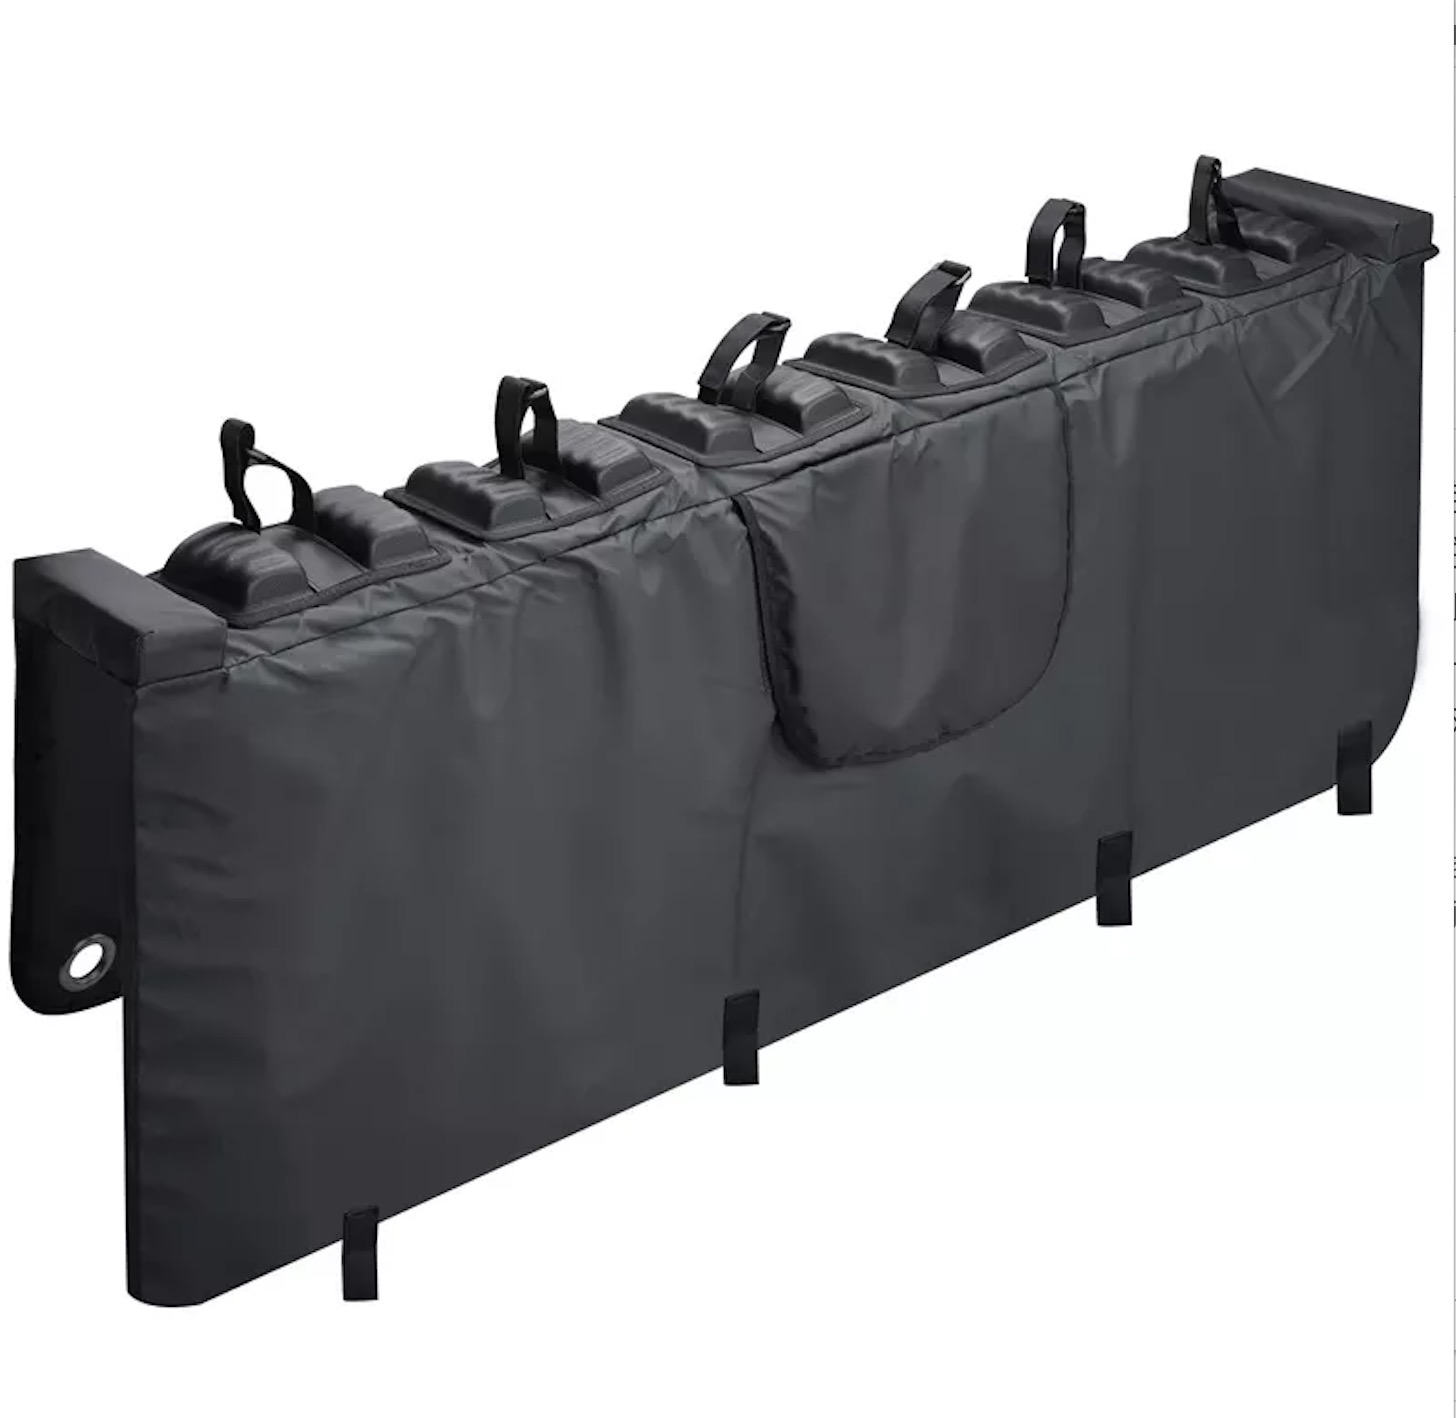 High Quality Tailgate Bike Cover with Utility Ring with Secure Frame Straps Carry up to Six Bikes Tailgate Bike Pads